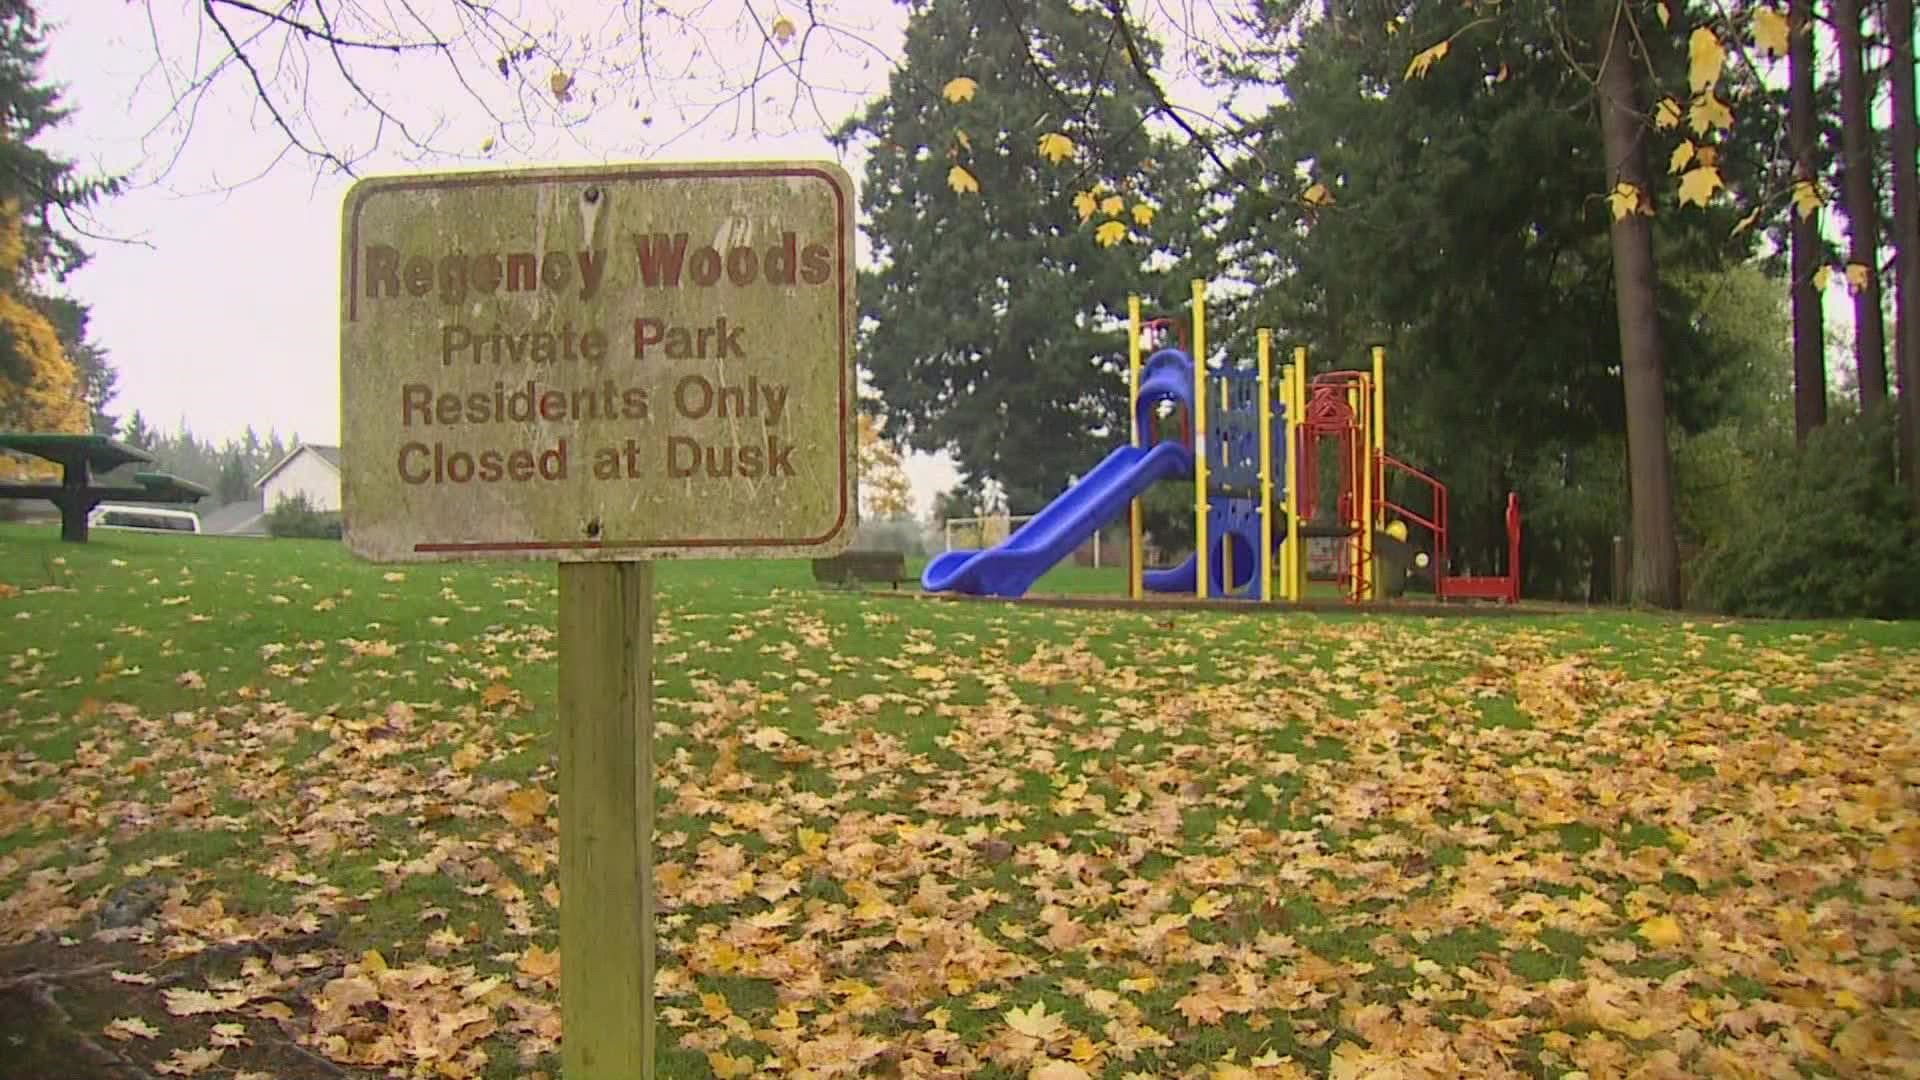 The body of a 13-year-old male was found in a park in Federal Way Wednesday morning after residents heard gunfire in the area.